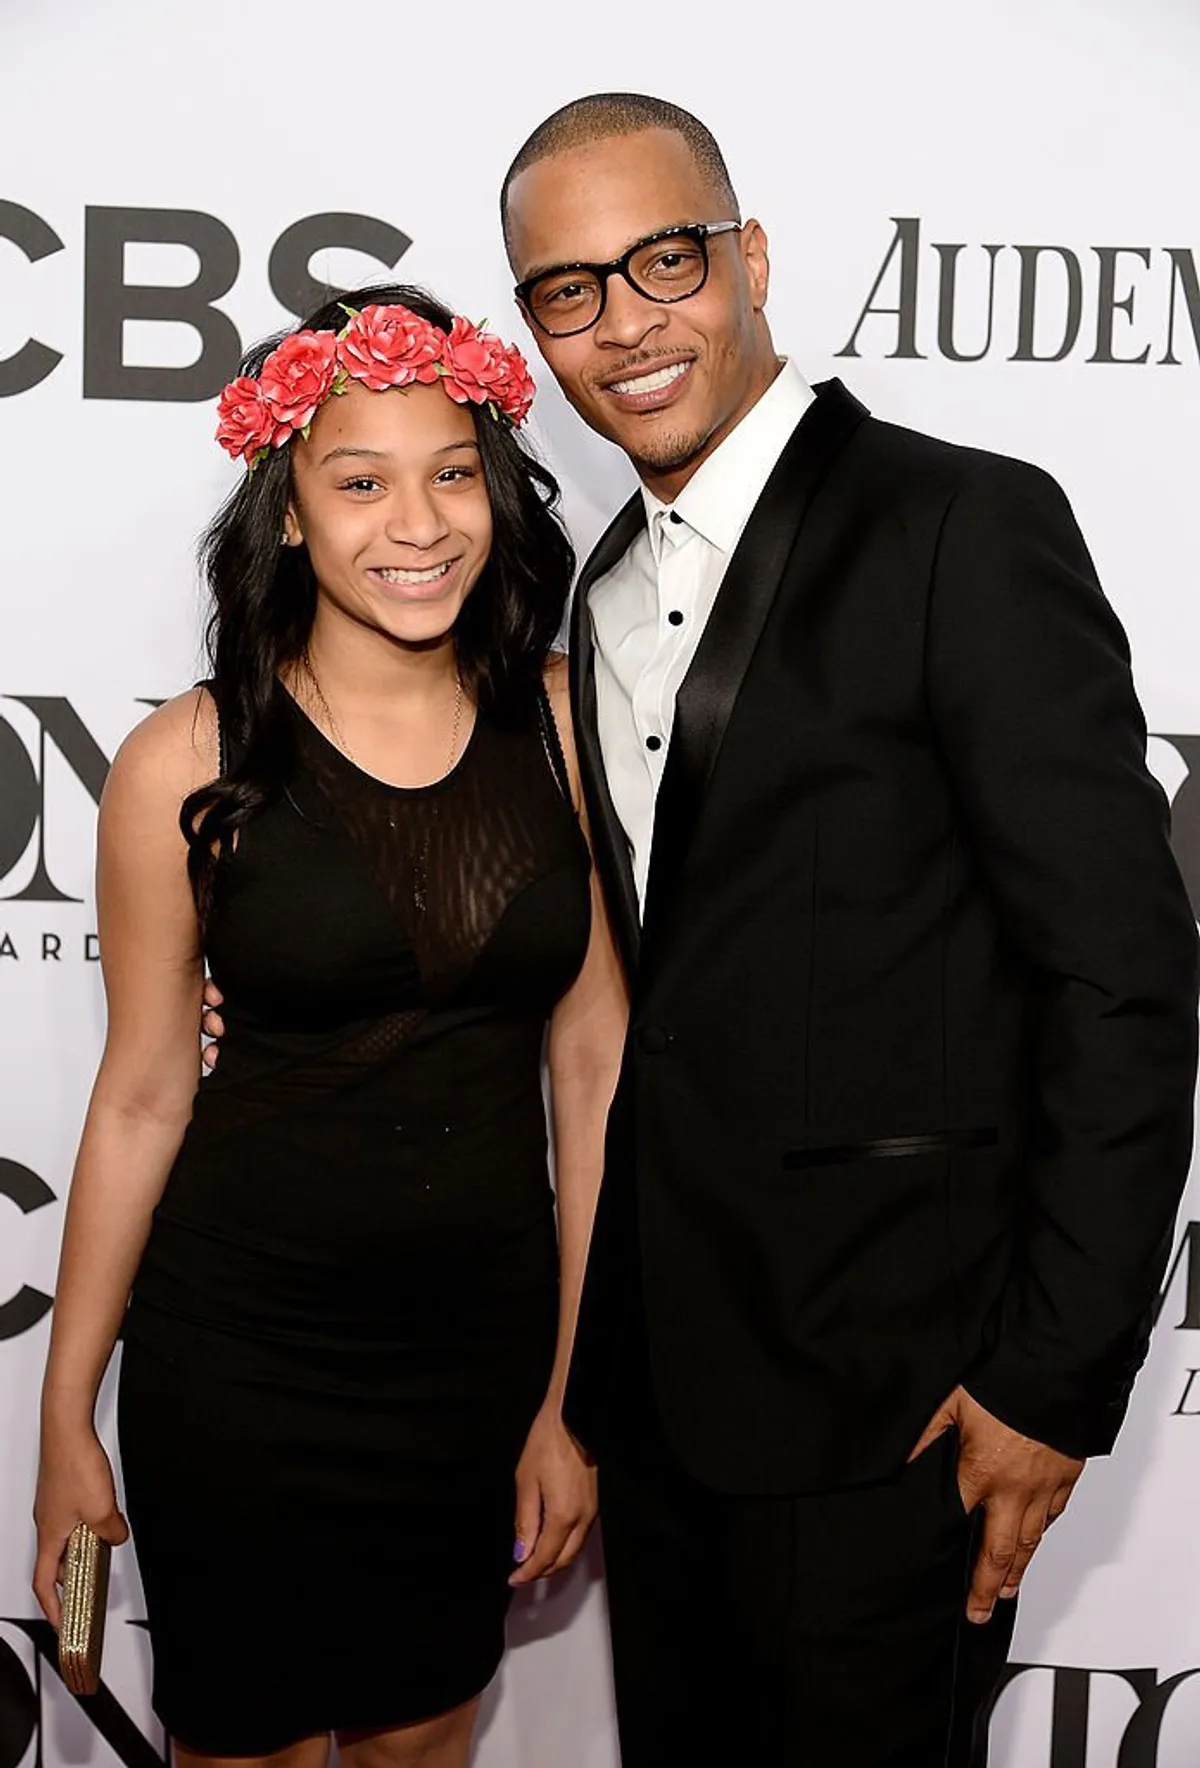 Deyjah Harris and her father T.I. attend the 68th Annual Tony Awards at Radio City Music Hall in June 2014. | Photo: Getty Images